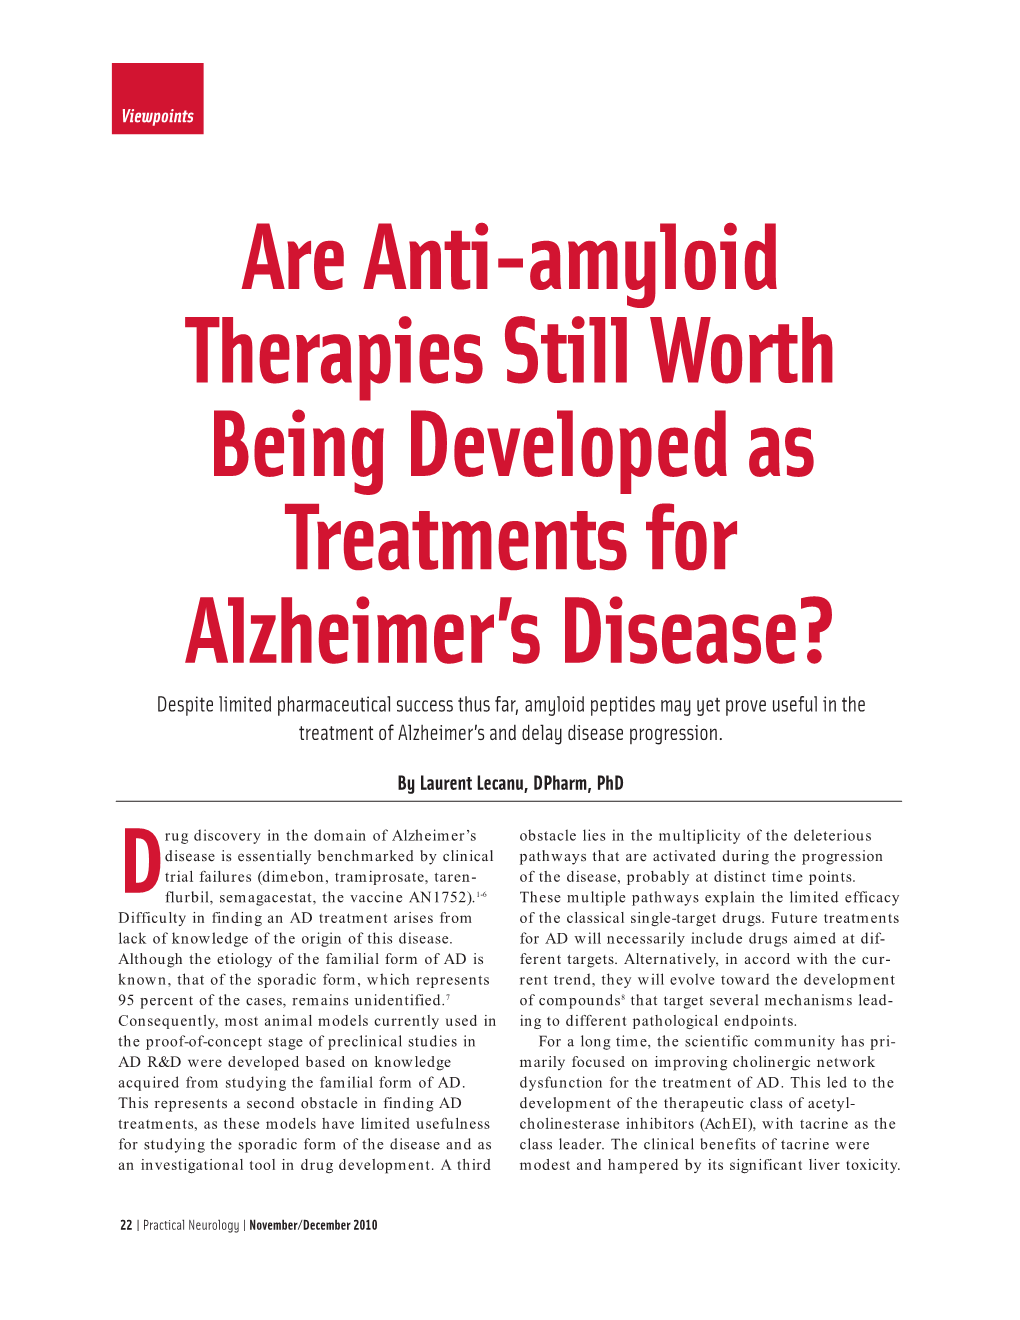 Are Anti-Amyloid Therapies Still Worth Being Developed As Treatments For